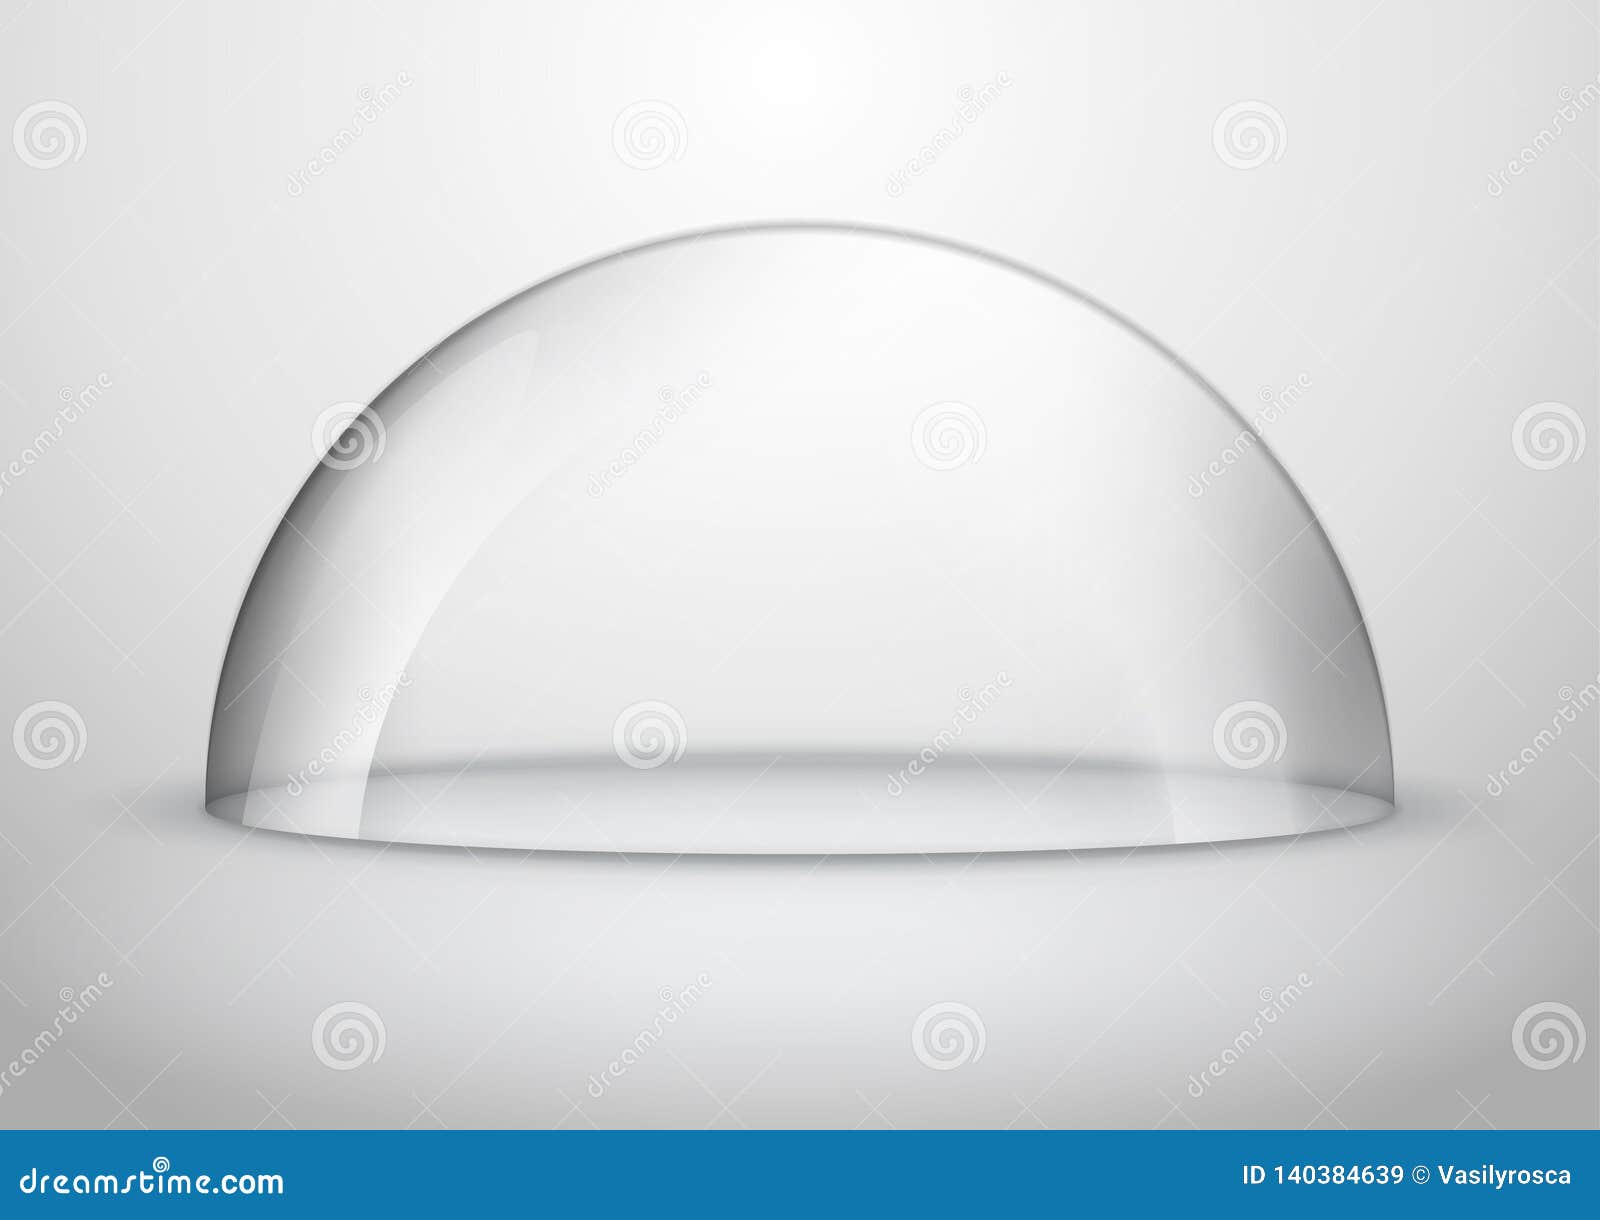 glass dome container mock-up. plastic dome model cover for exhibition . blank  transparent dome